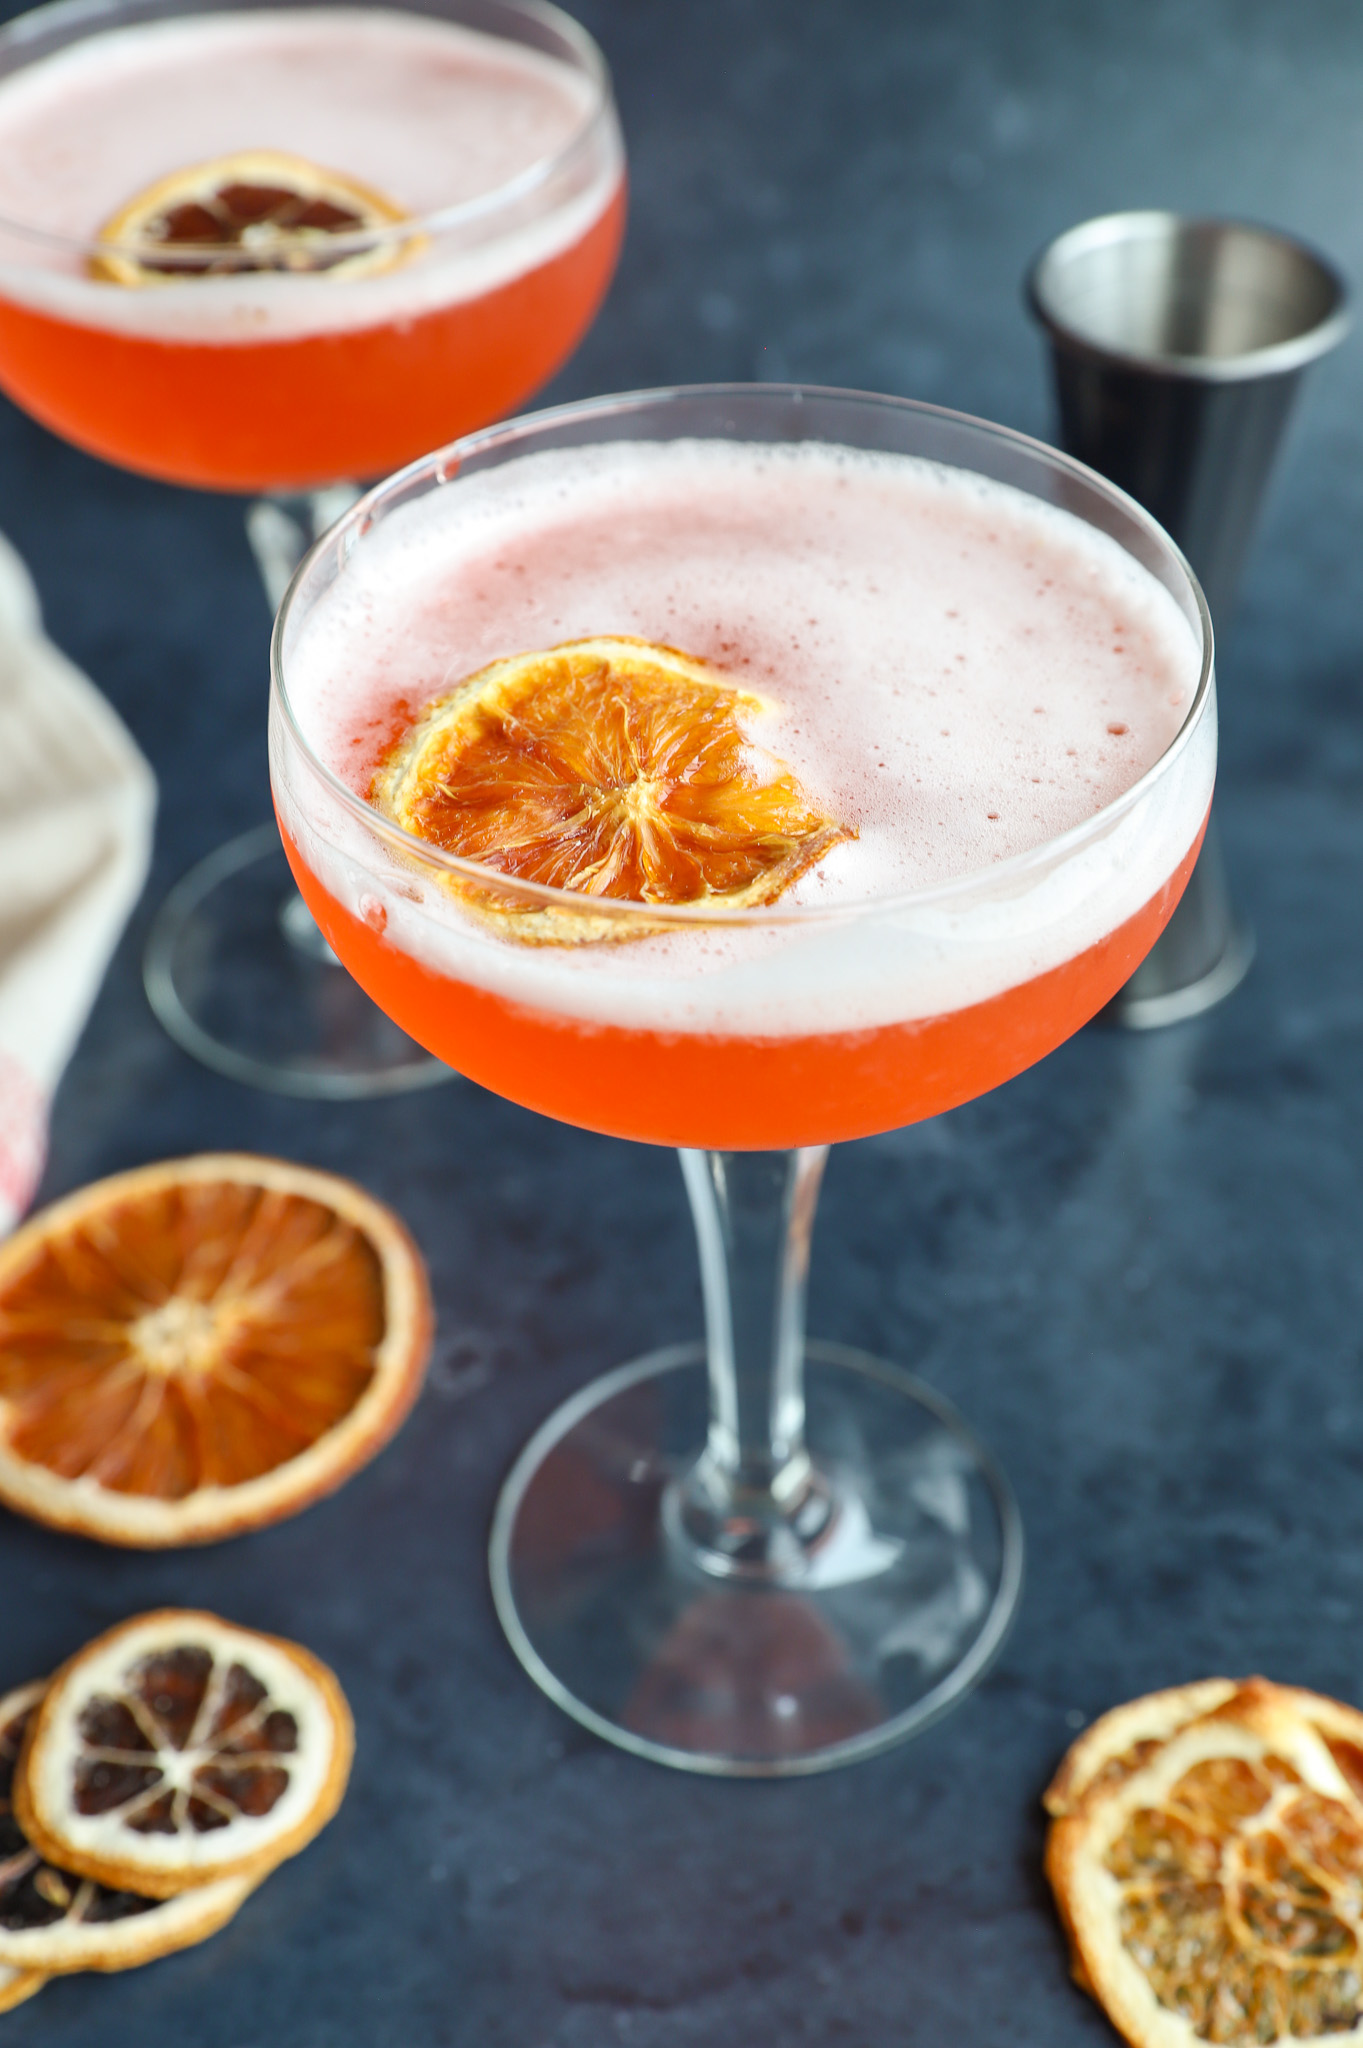 20 Simple Aperol Cocktails - Insanely Good